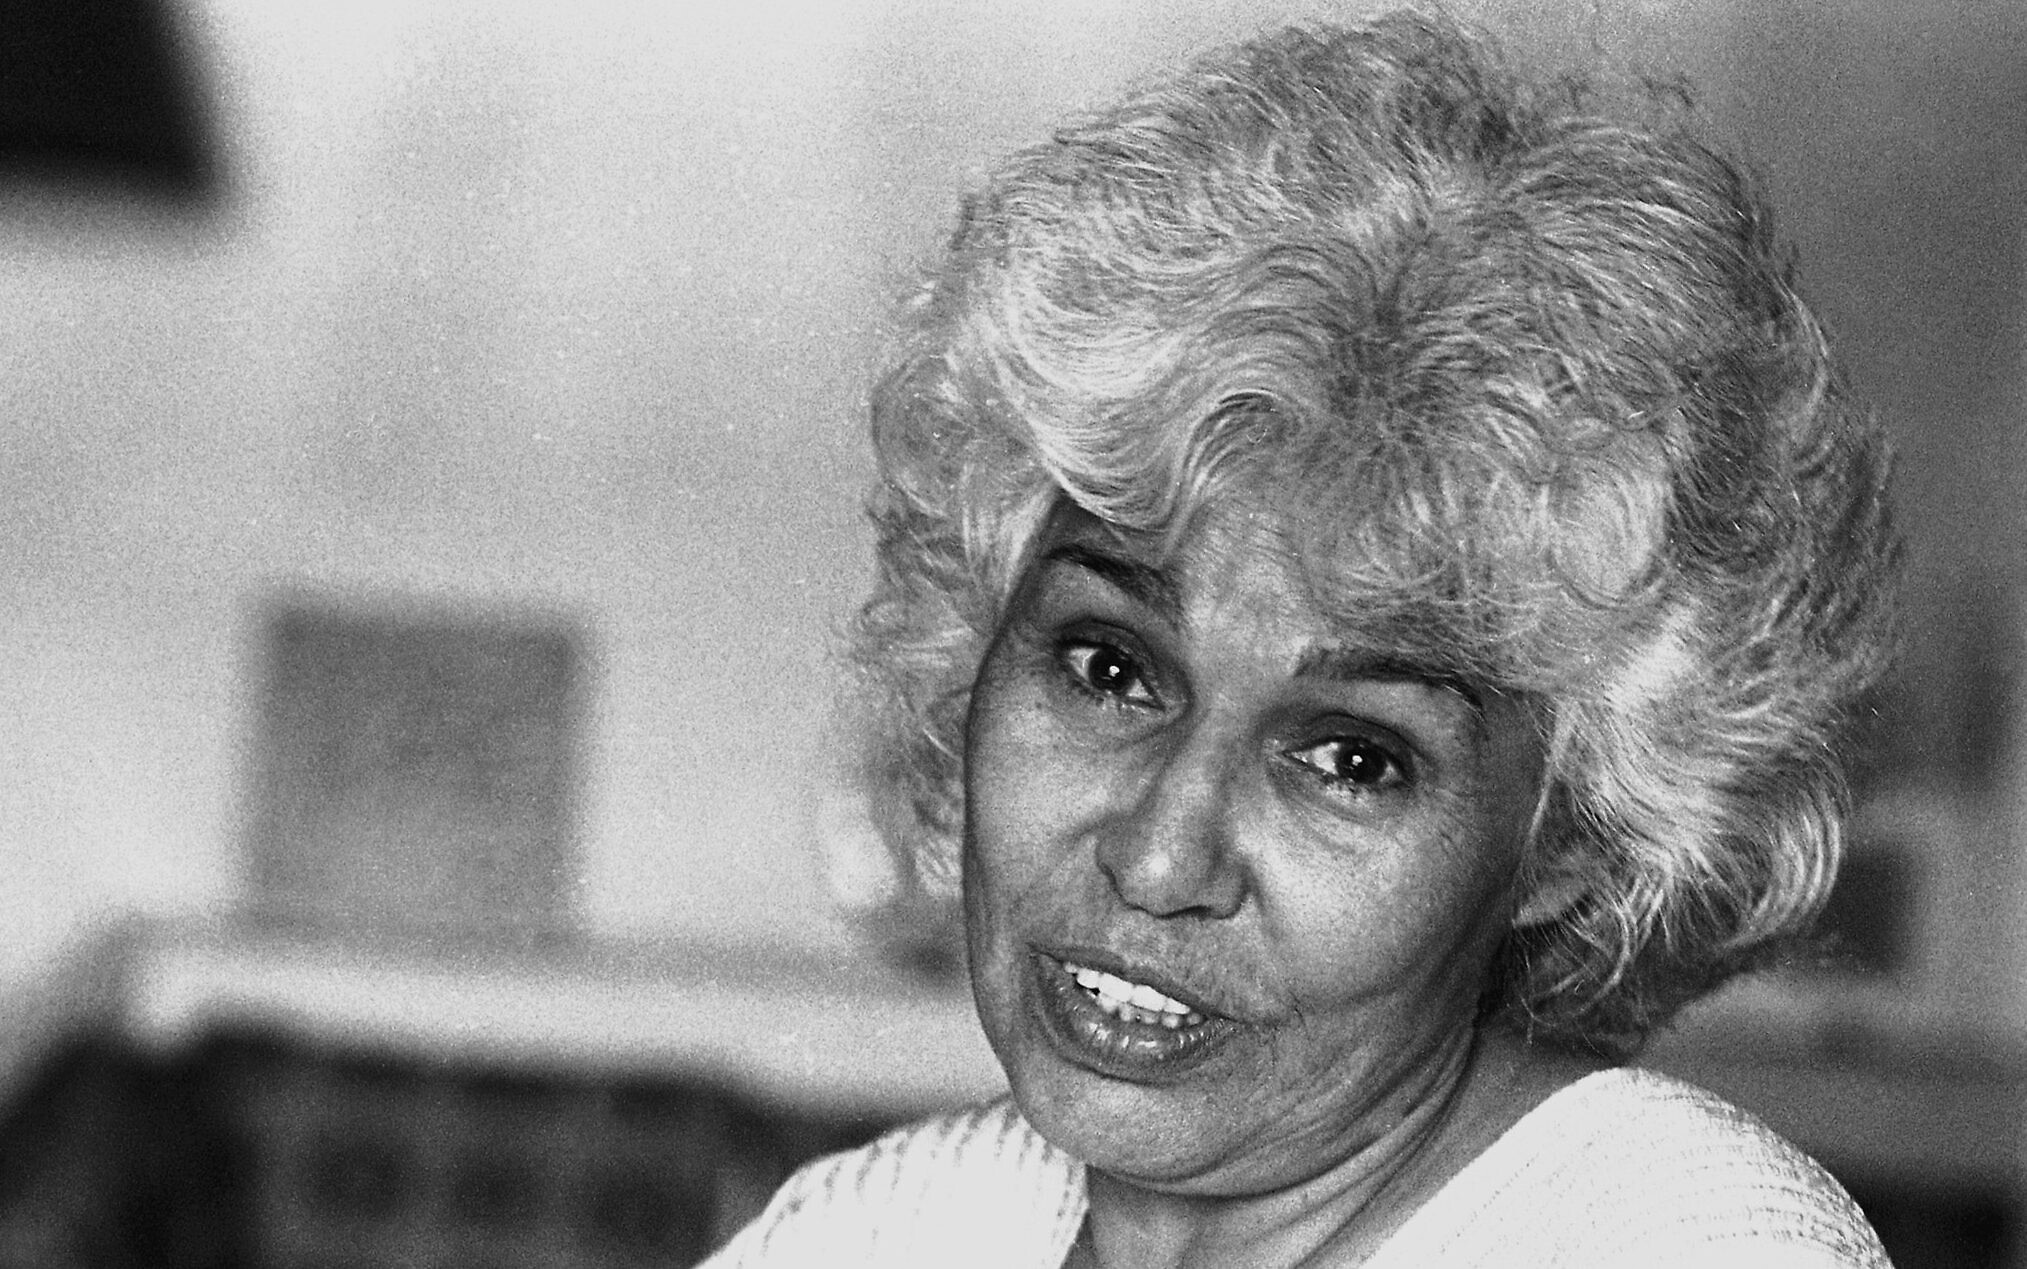 Egyptian feminist icon and author Nawal el-Saadawi dies at 89 | The Times of Israel